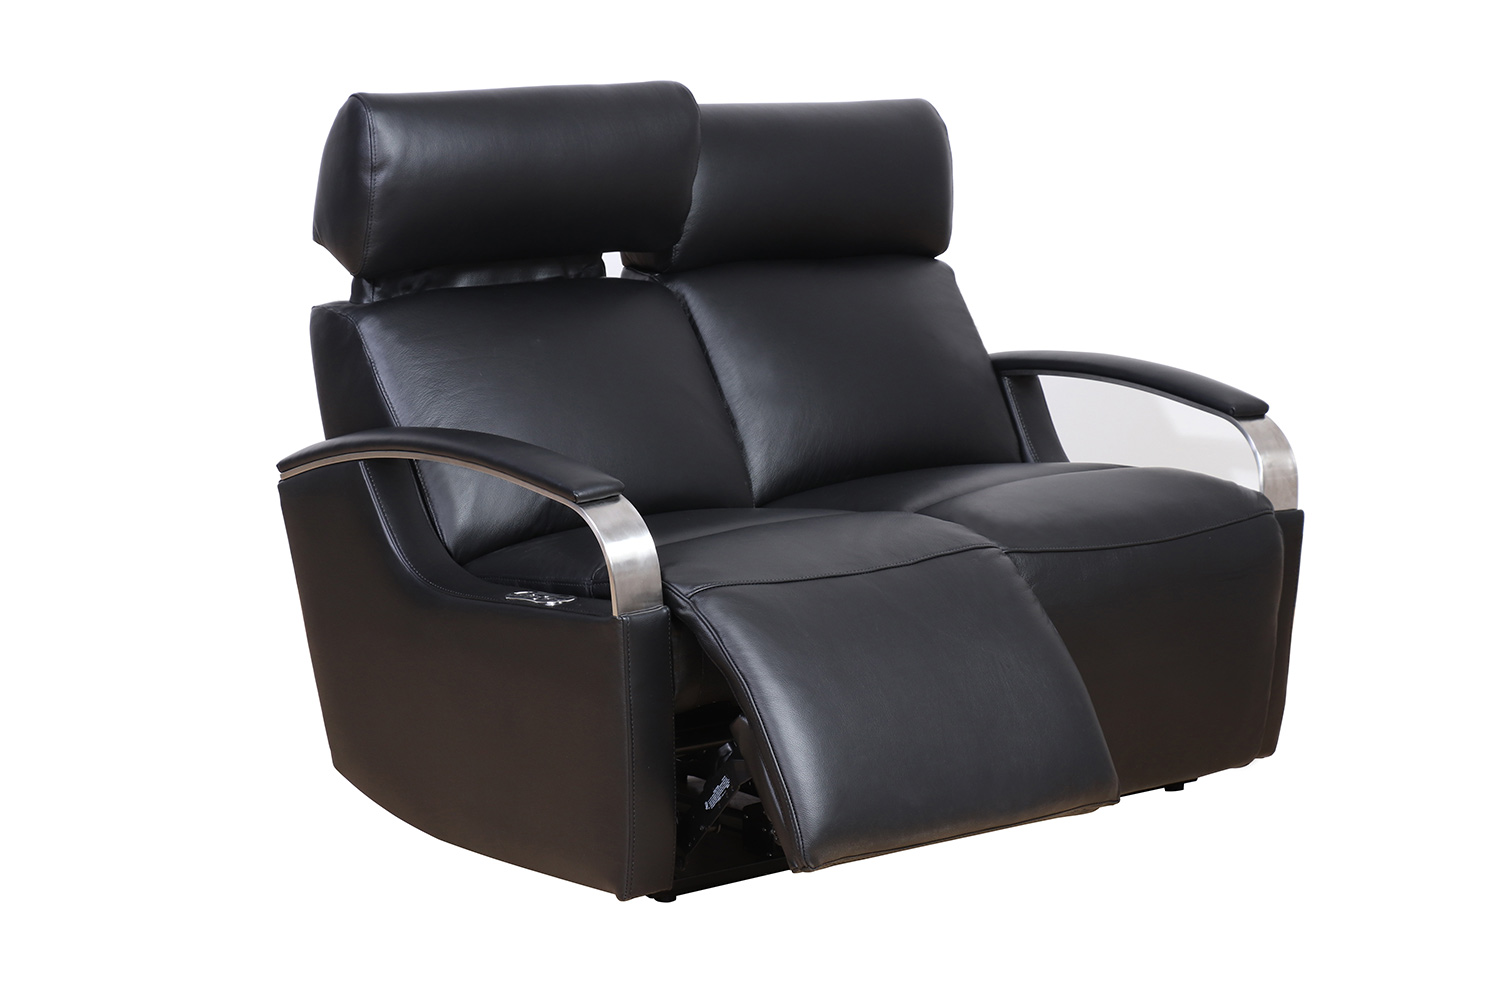 Barcalounger Cosmo Power Reclining Loveseat with Power Head Rests - Apollo Onyx/Leather Match